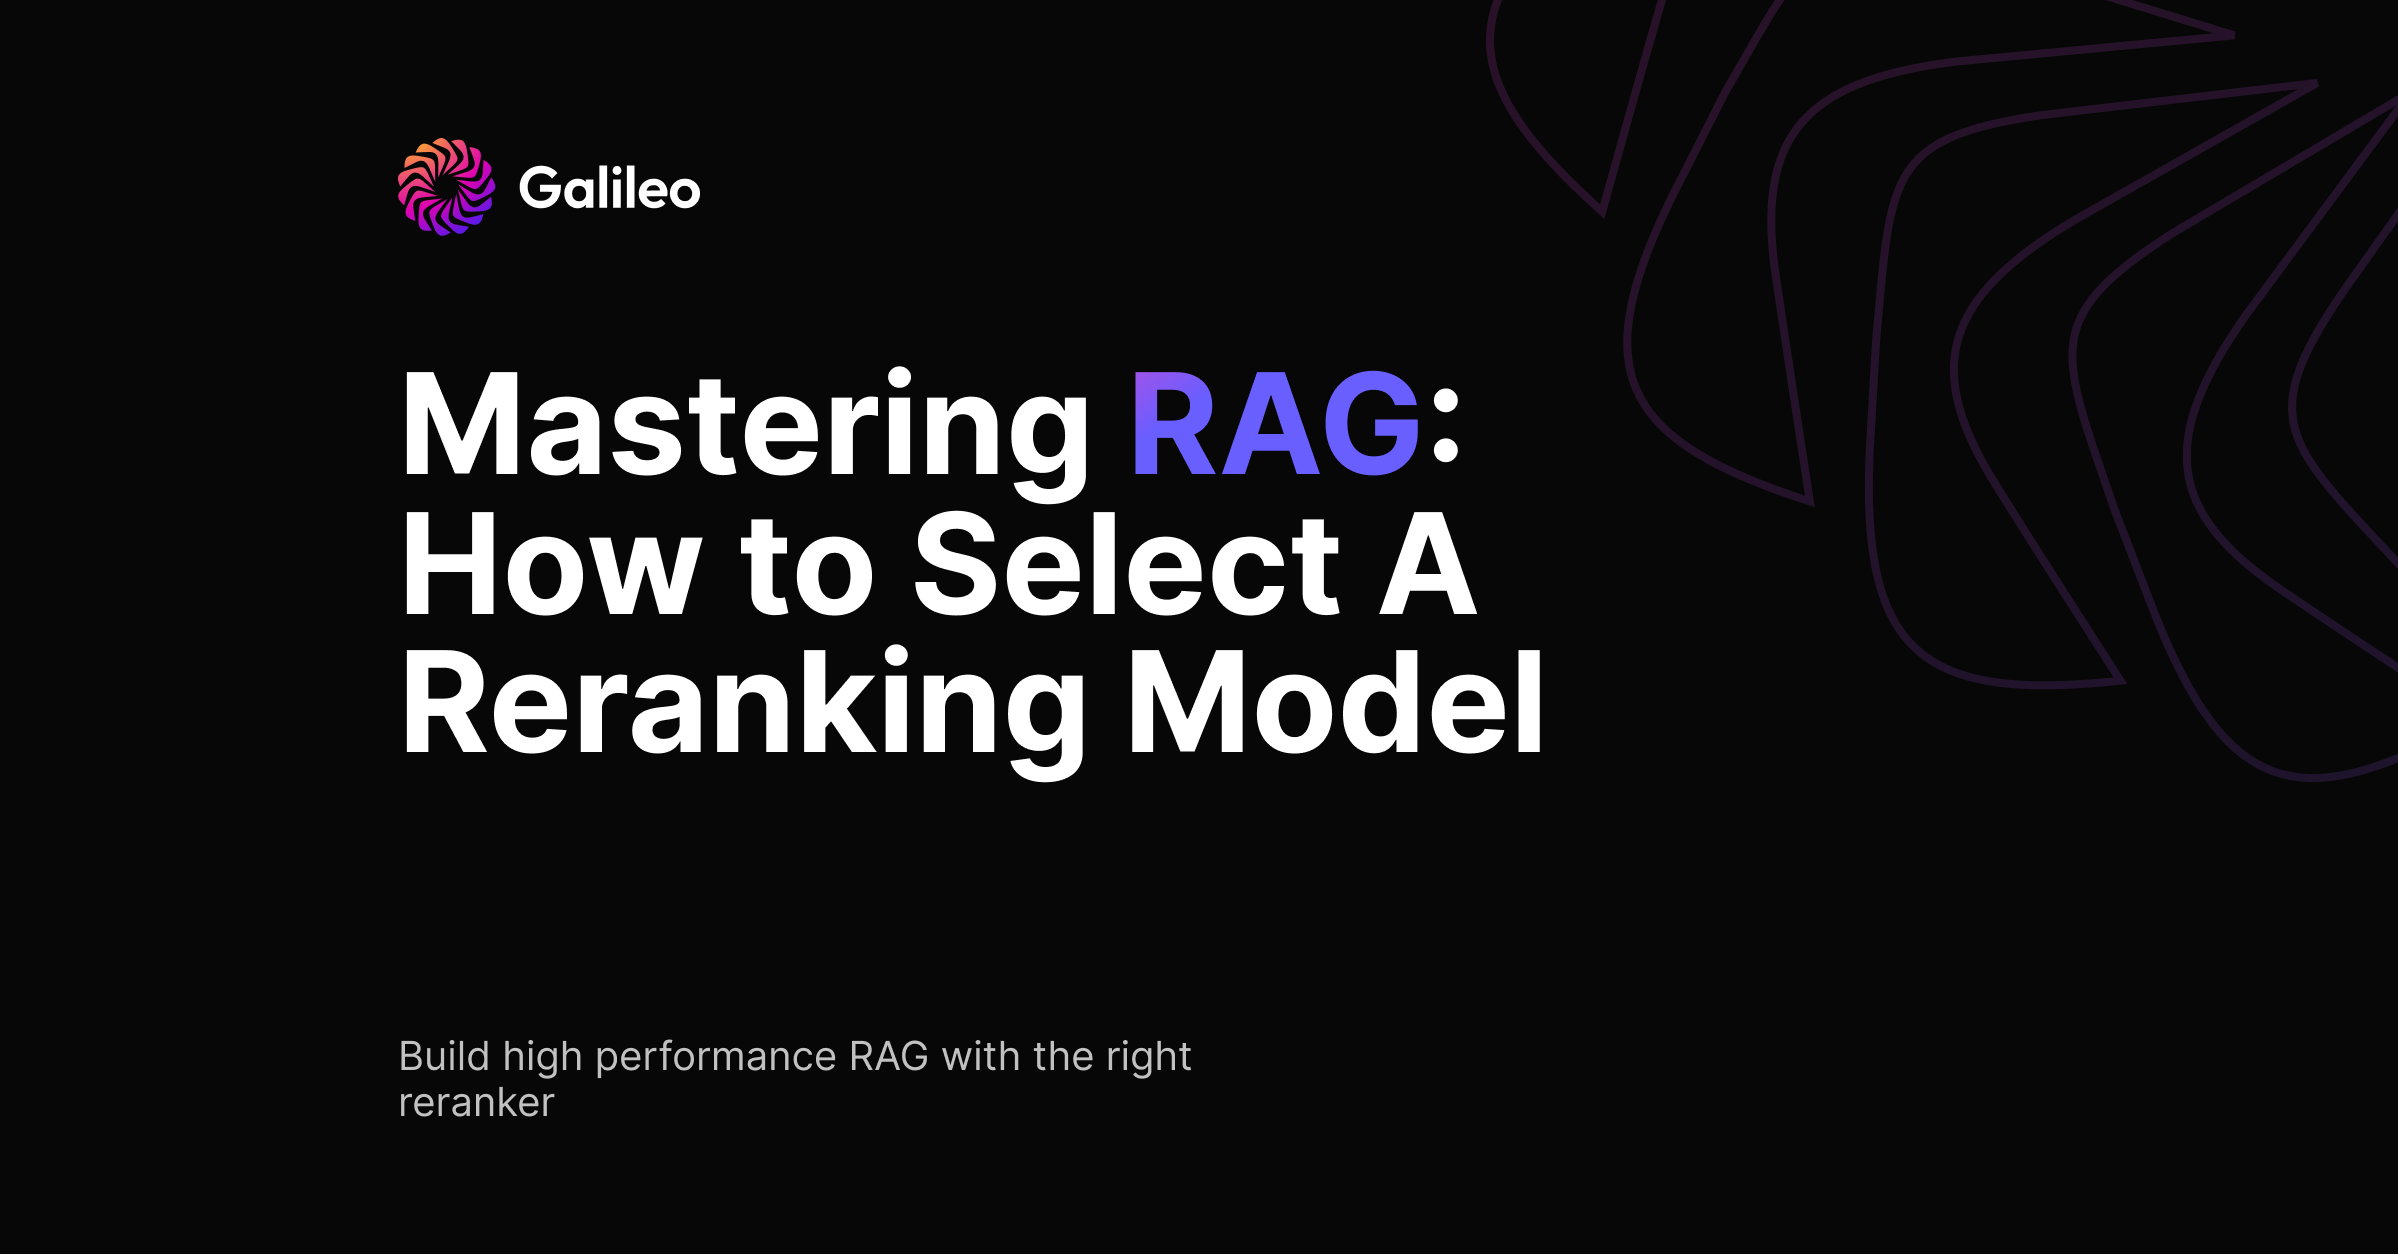 Mastering RAG: How to Select A Reranking Model